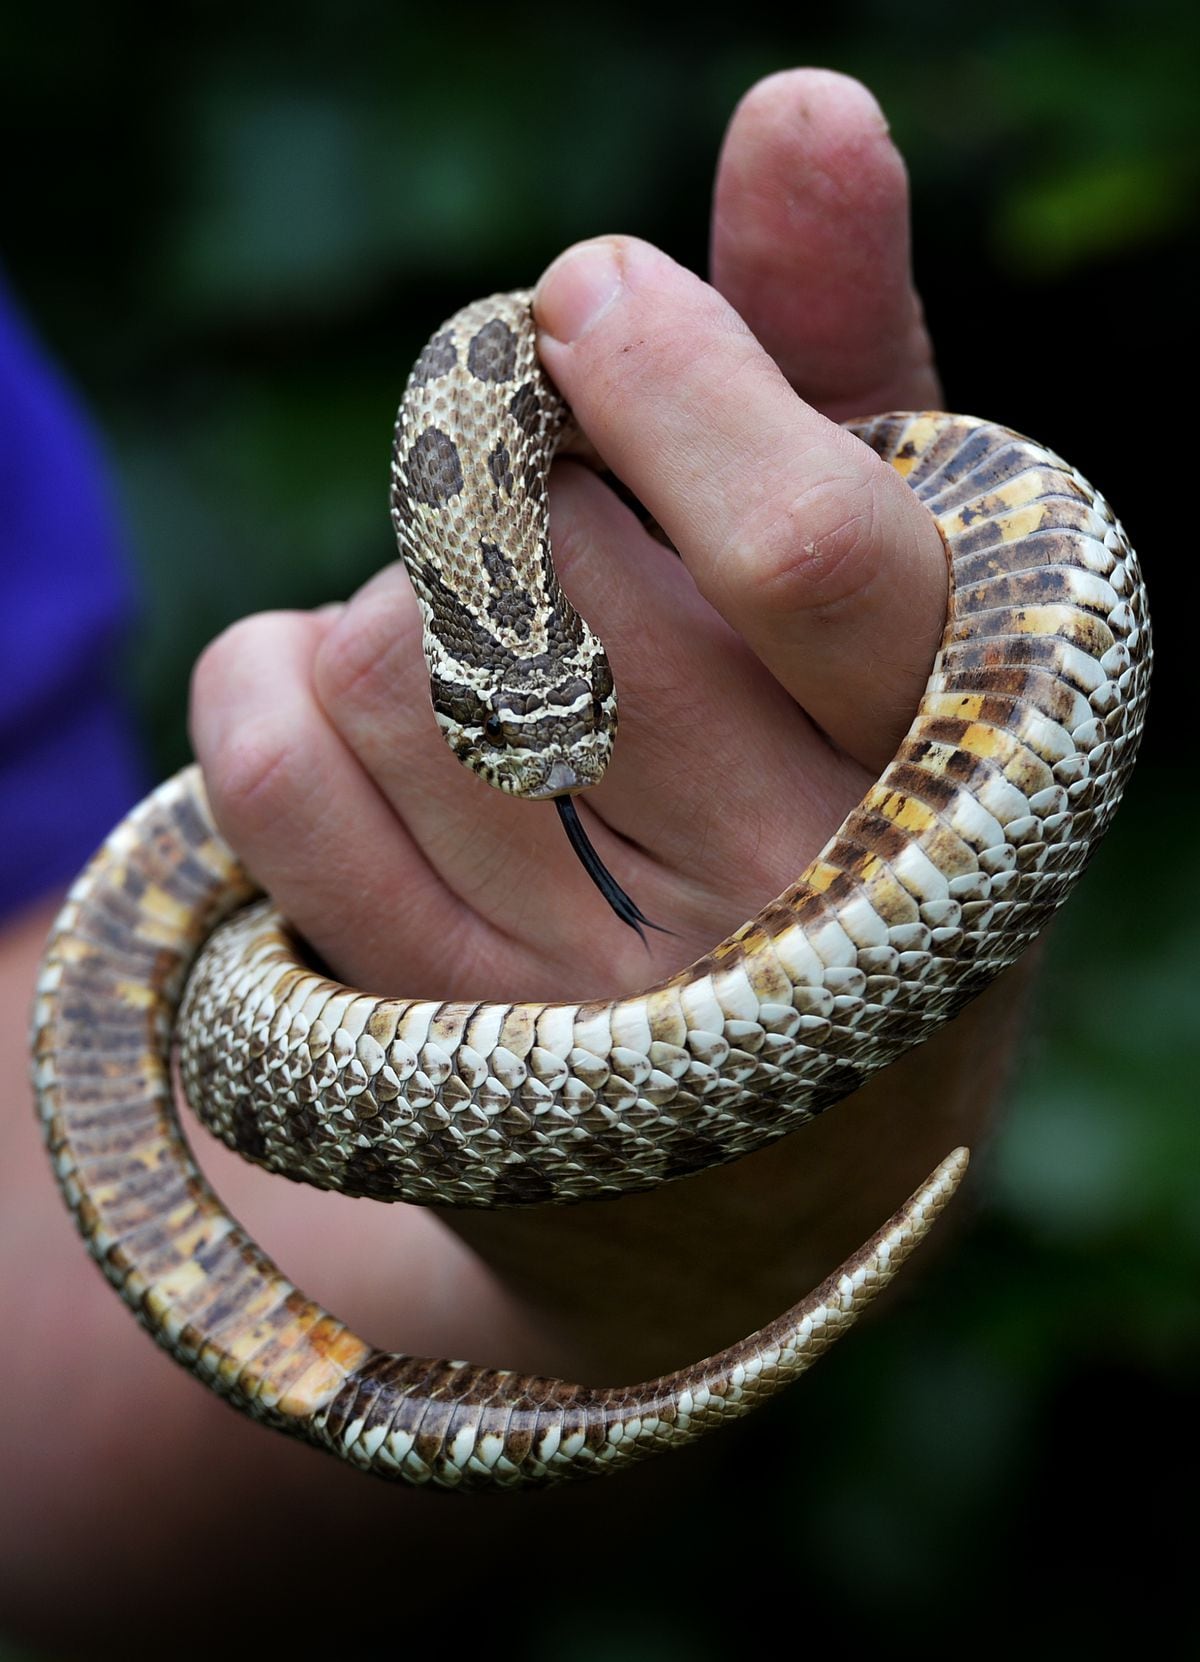 Dale Preece-Kelly from Critterish Allsorts found a Western Hognose snake while dog walking on Kinver Edge